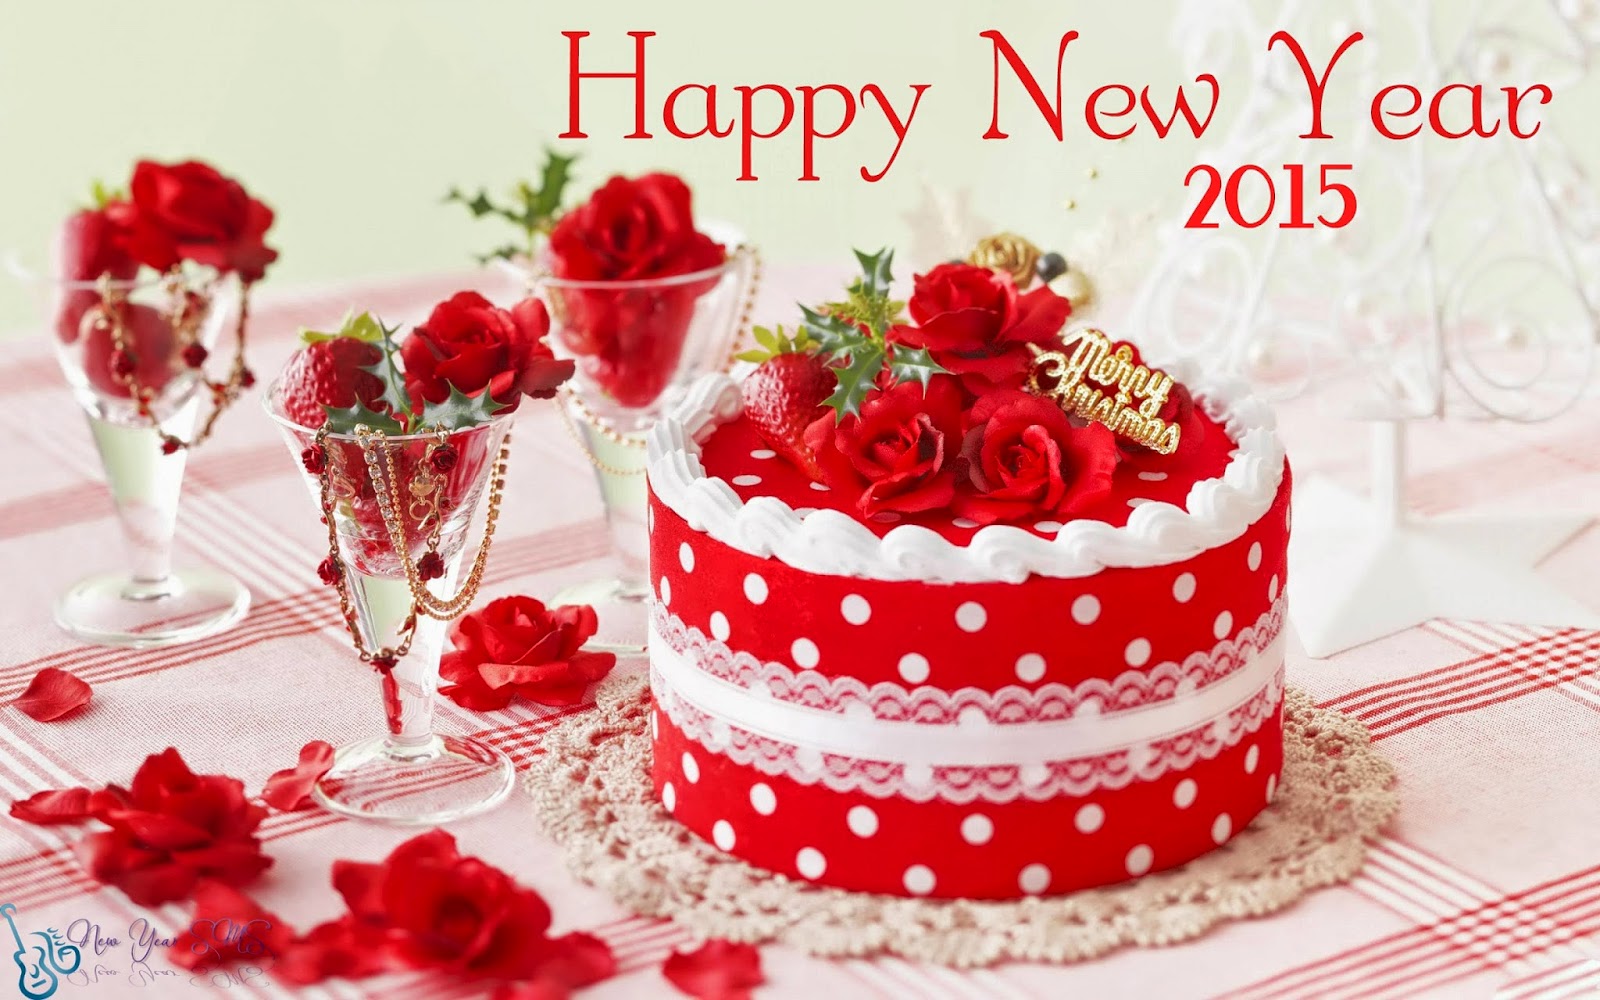 Happy New Year HD Wallpaper Image Of